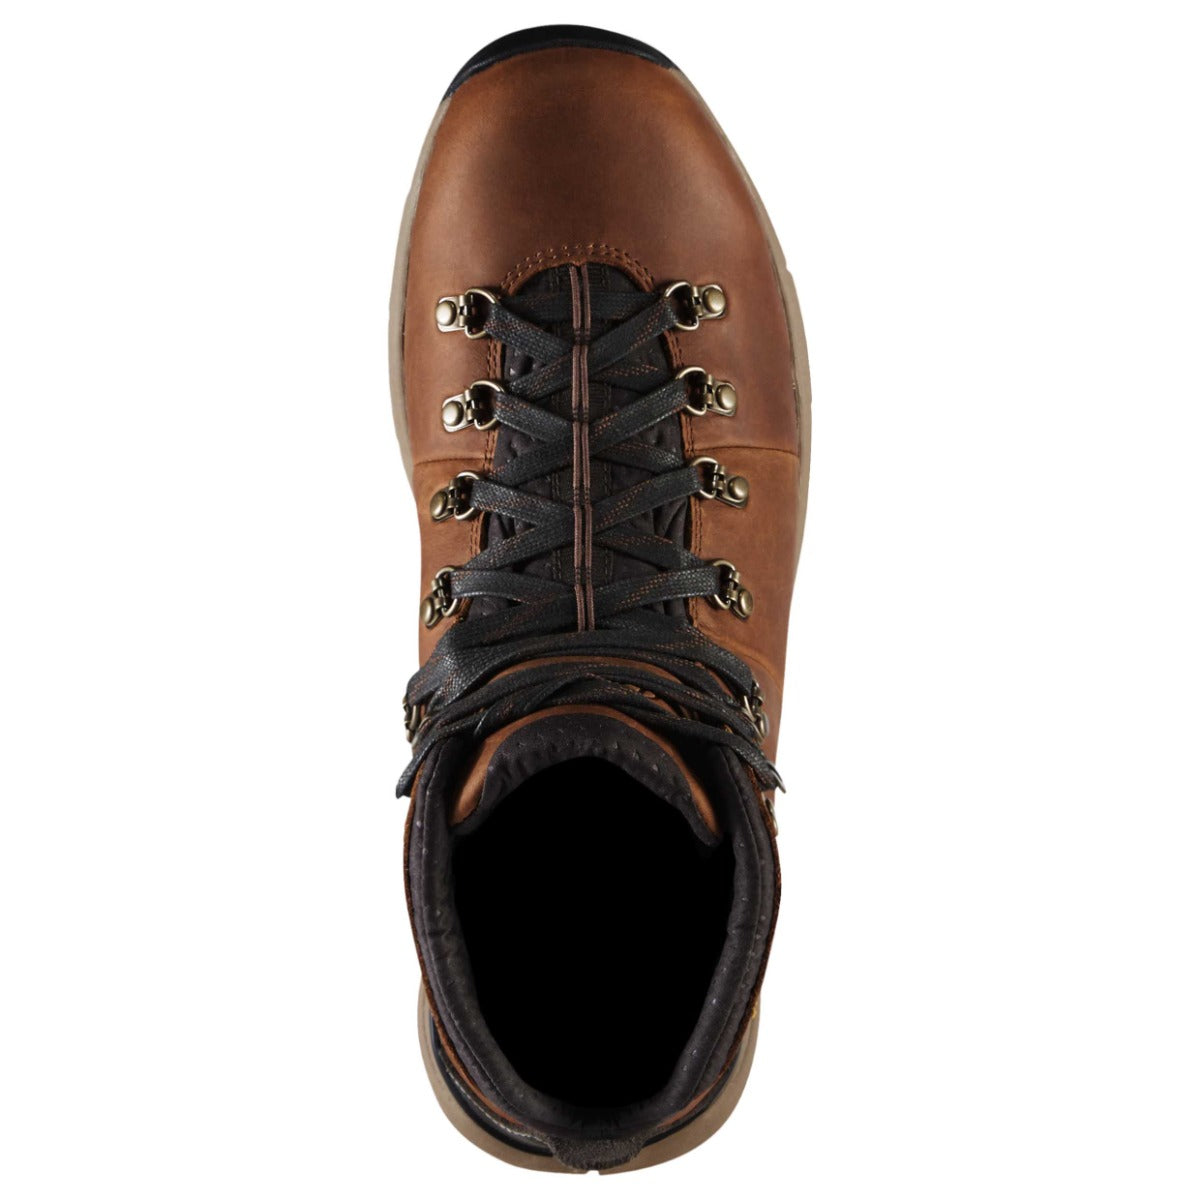 Brown Leather 'Mountain 600' Waterproof Boots Boot Danner   